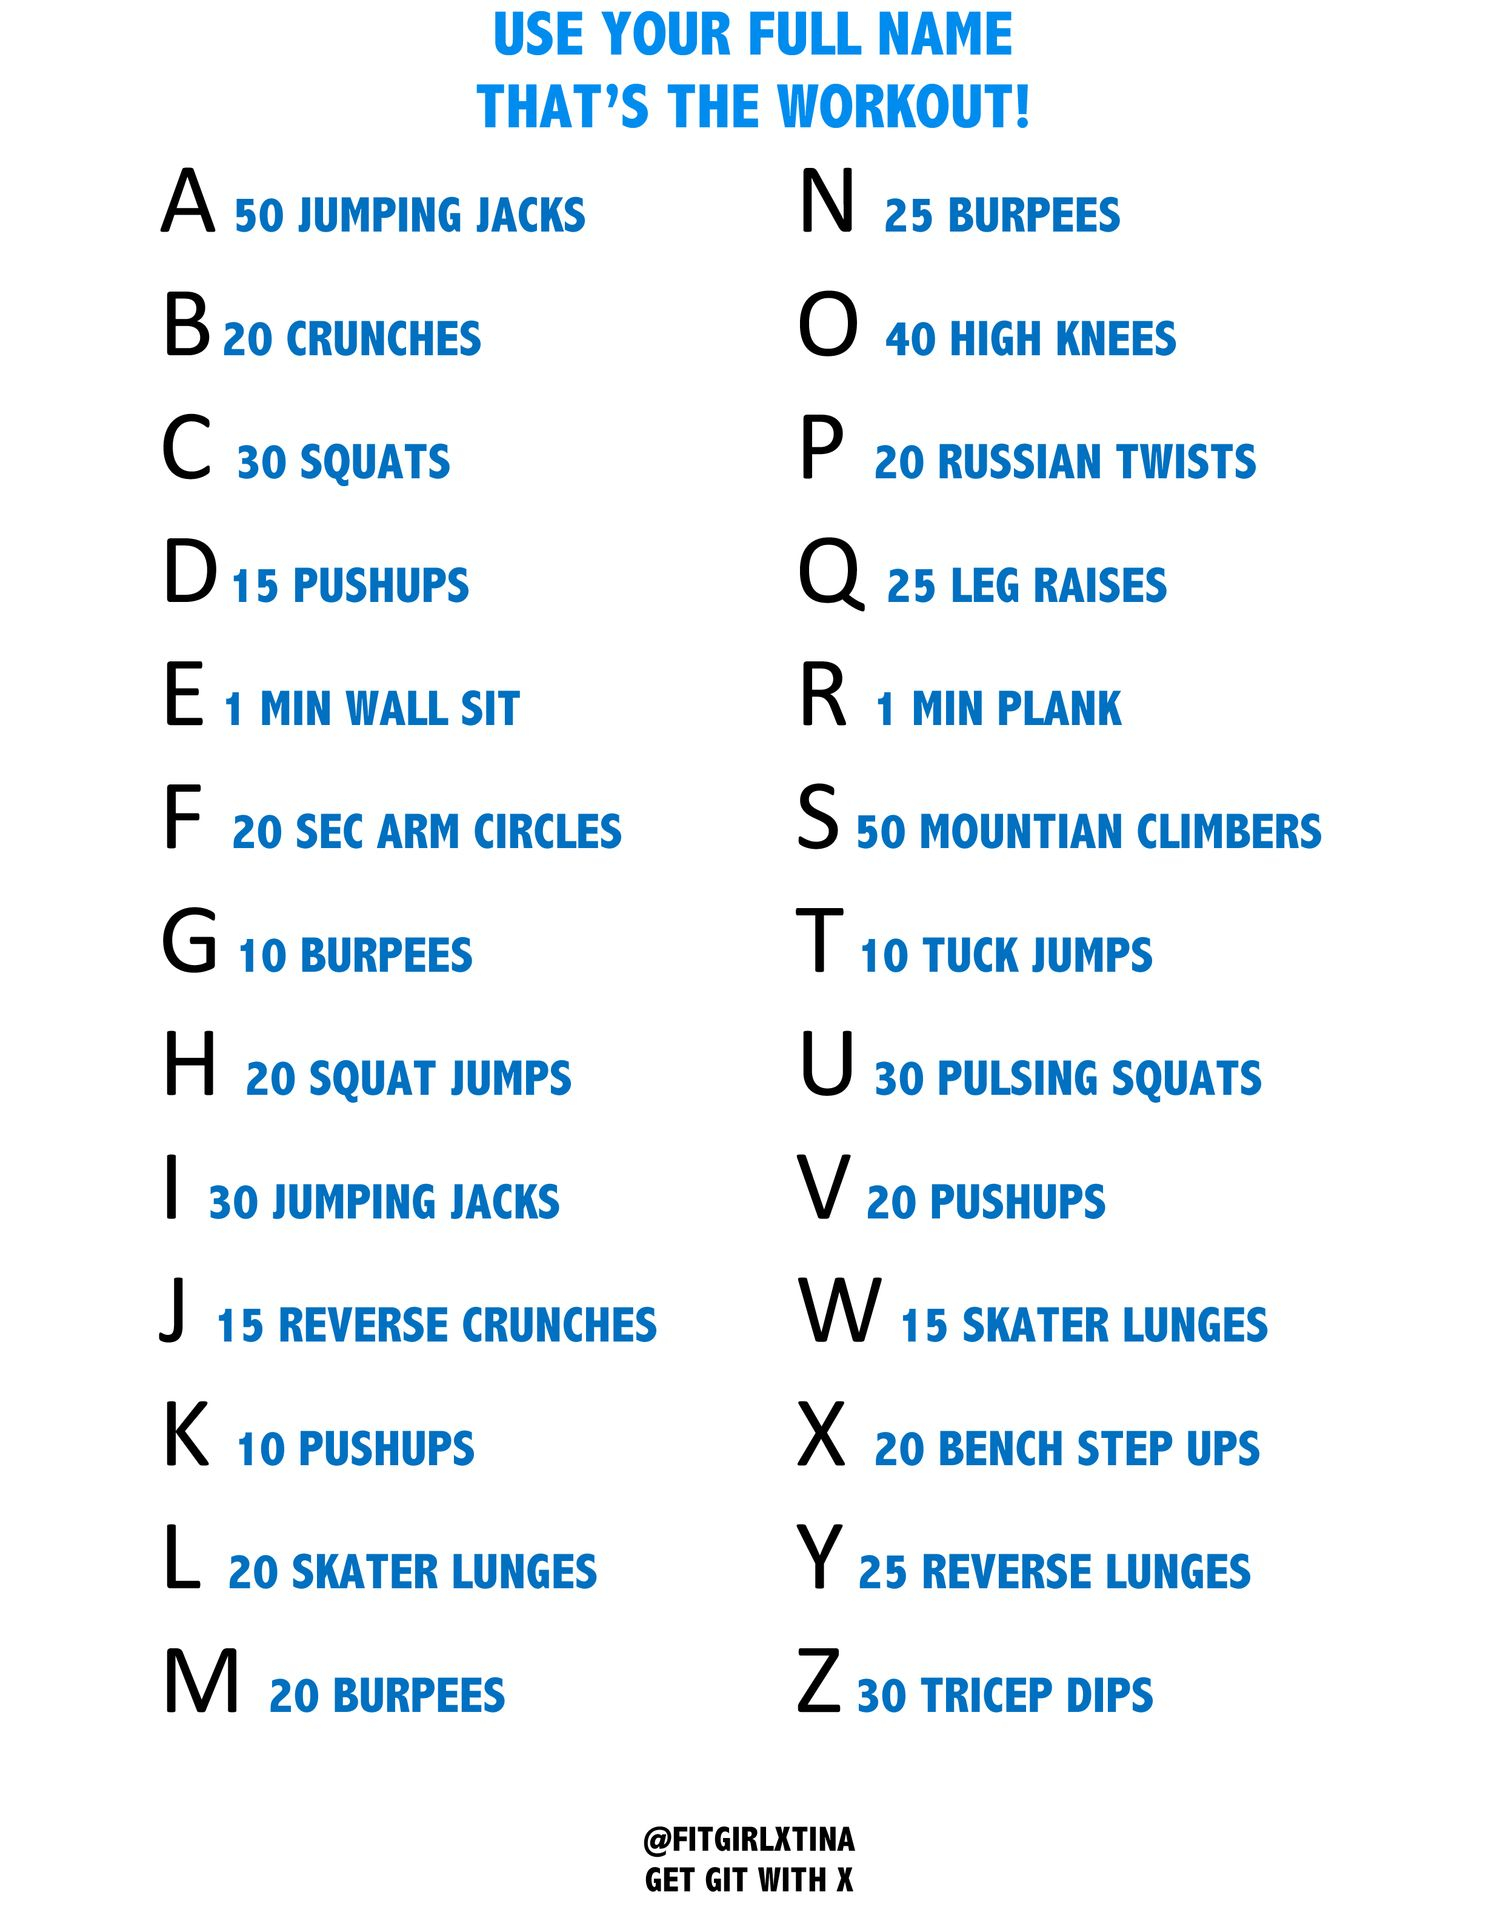 Alphabet Workout Challenge. Pining This For Later intended for Alphabet Exercises Workout